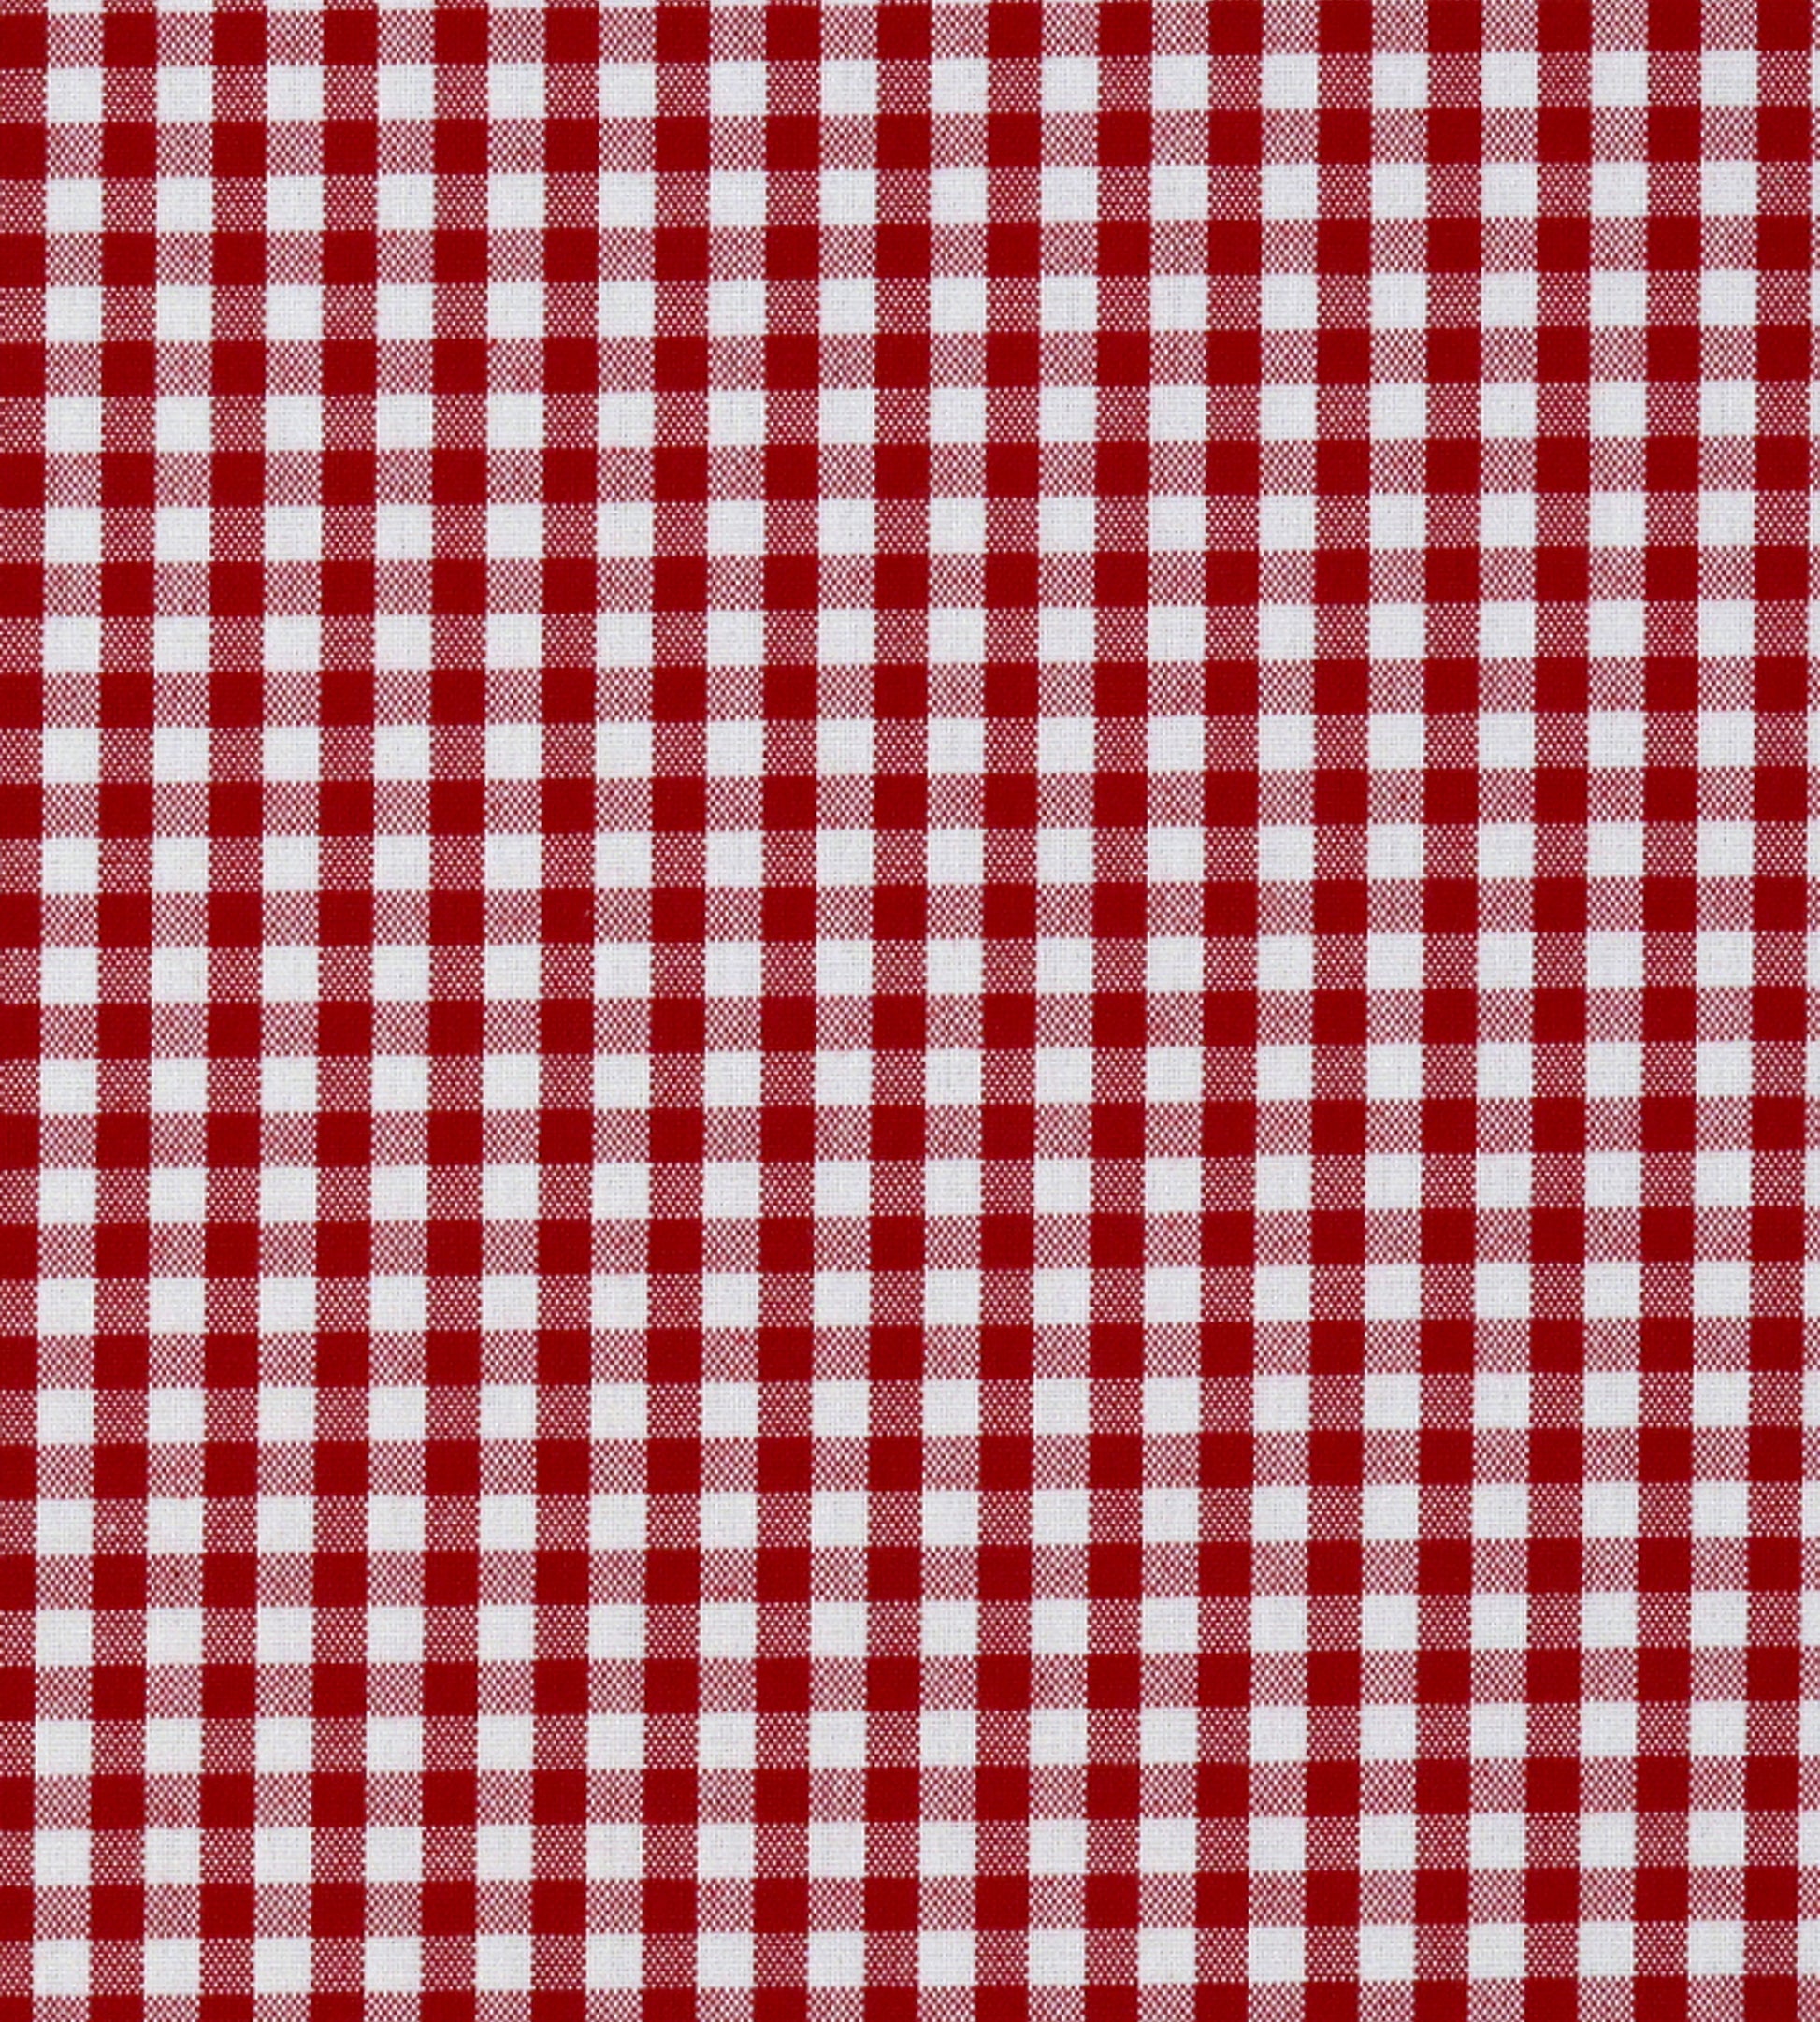 Purchase Old World Weavers Fabric SKU F3 00113018, Poker Check Red 1